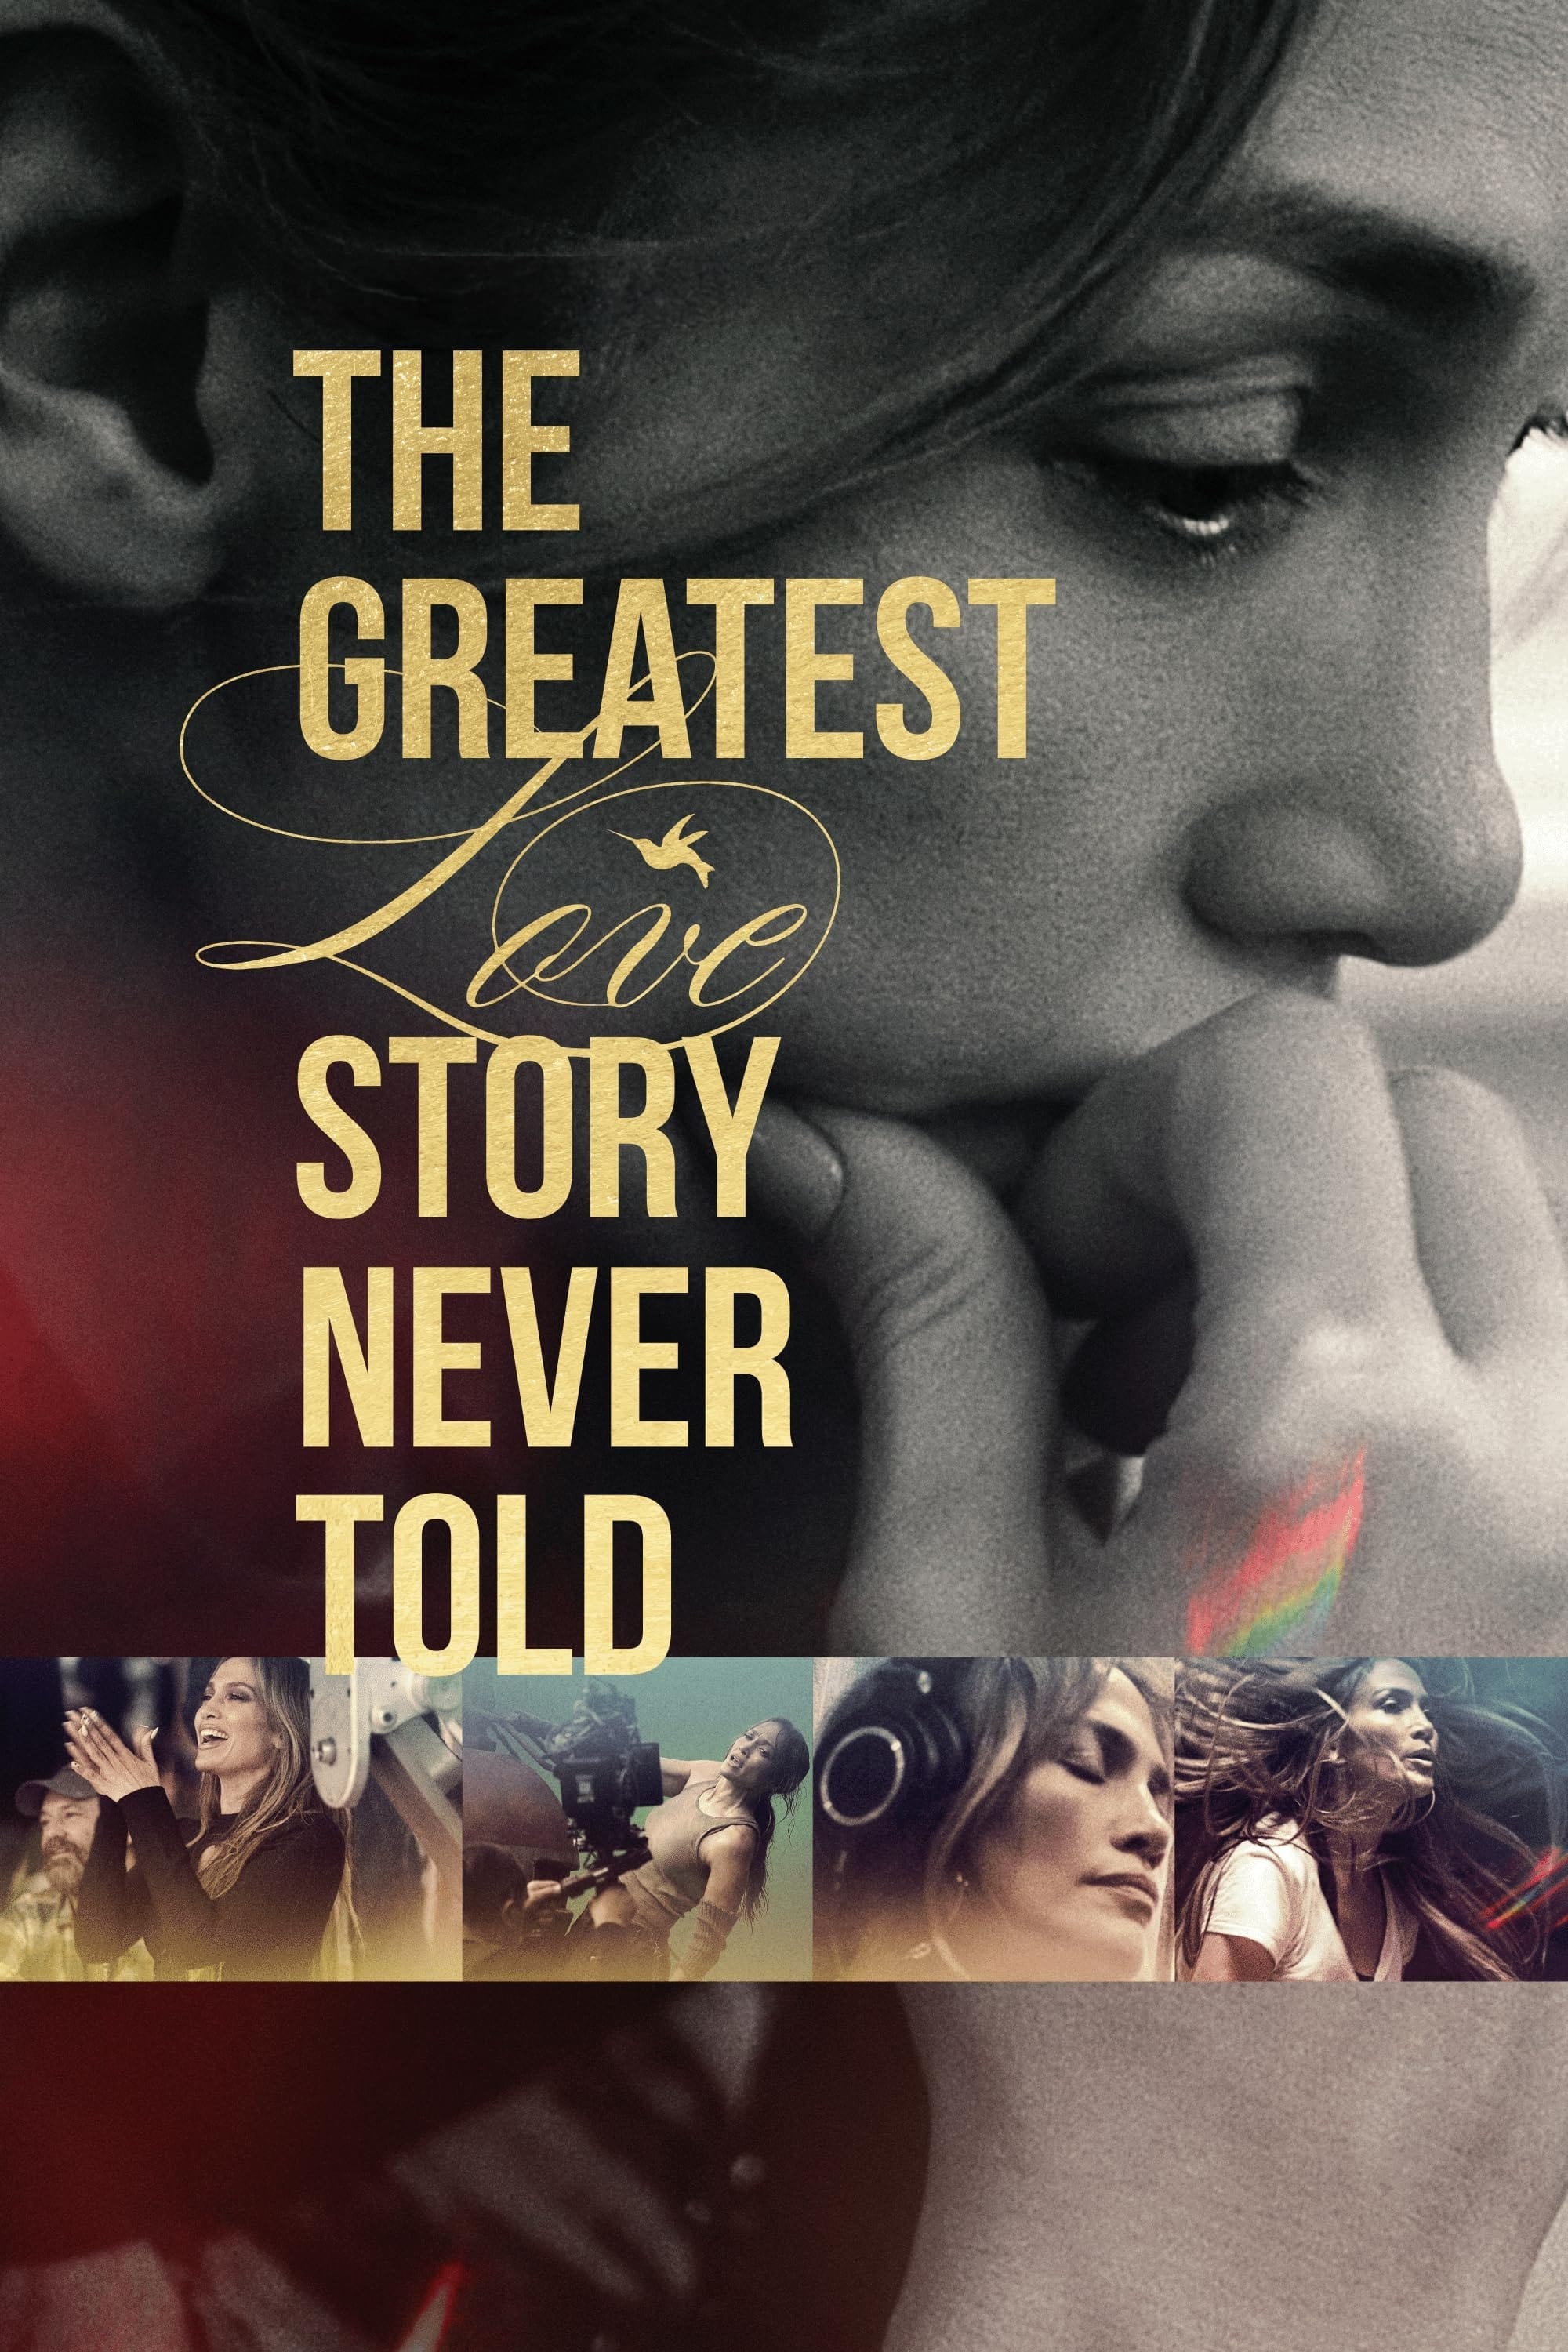 The Greatest Love Story Never Told film